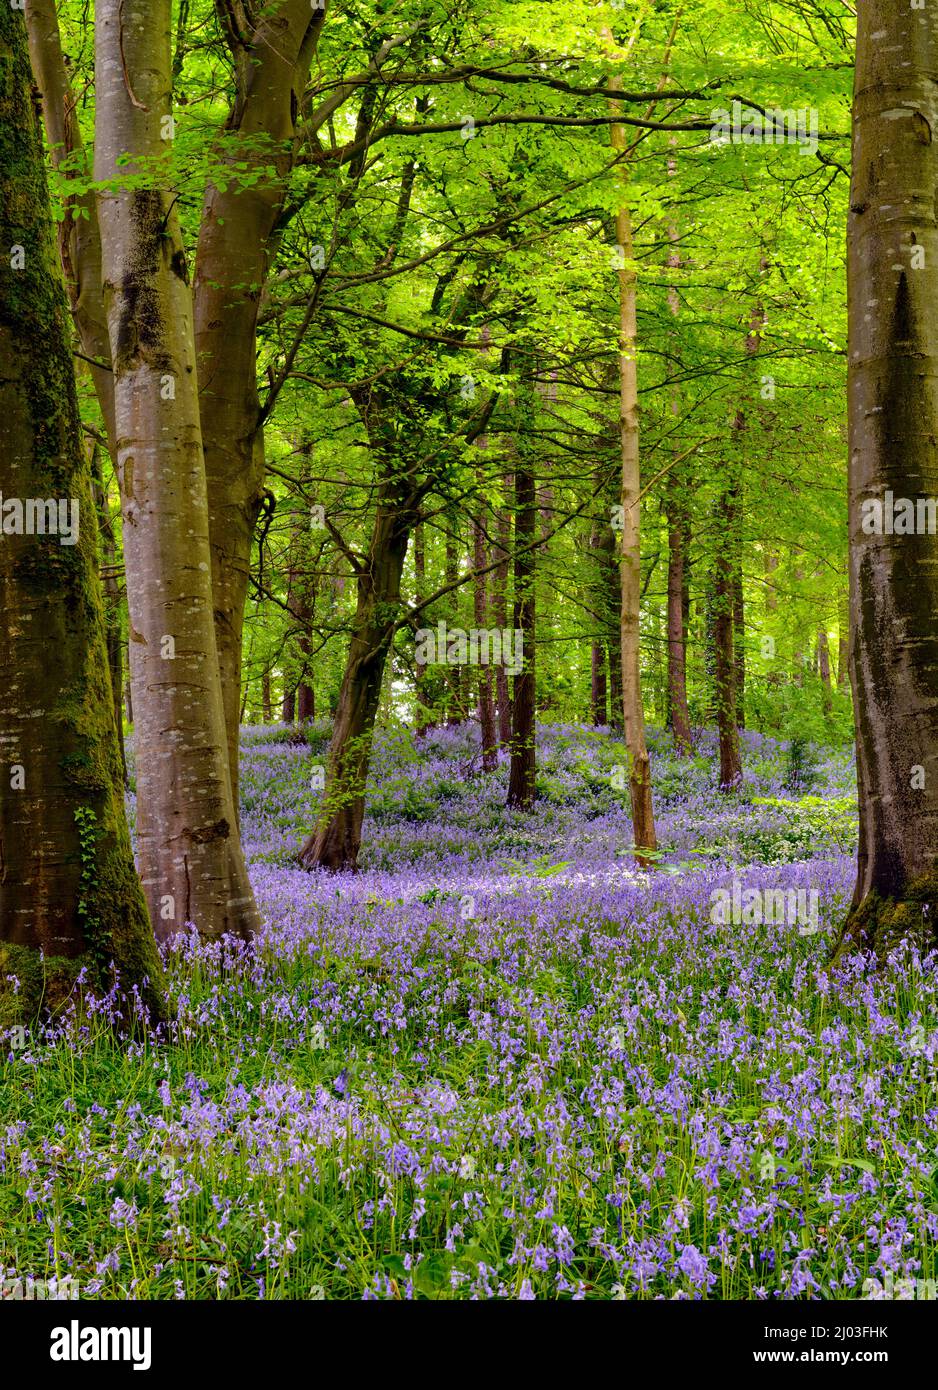 A carpet of Bluebells at Portglenone Forest Park, County Antrim, Northern Ireland Stock Photo